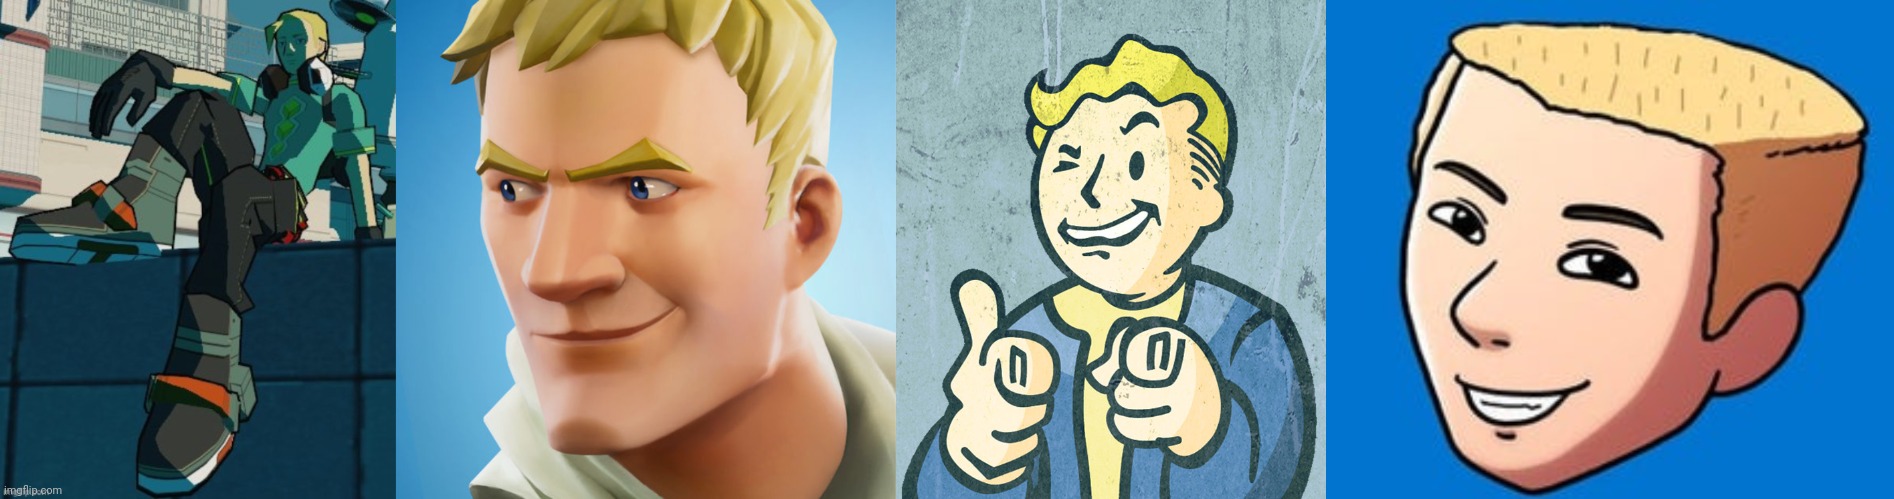 They're all the same | image tagged in jonesy,vault boy point wink,drew durnil | made w/ Imgflip meme maker